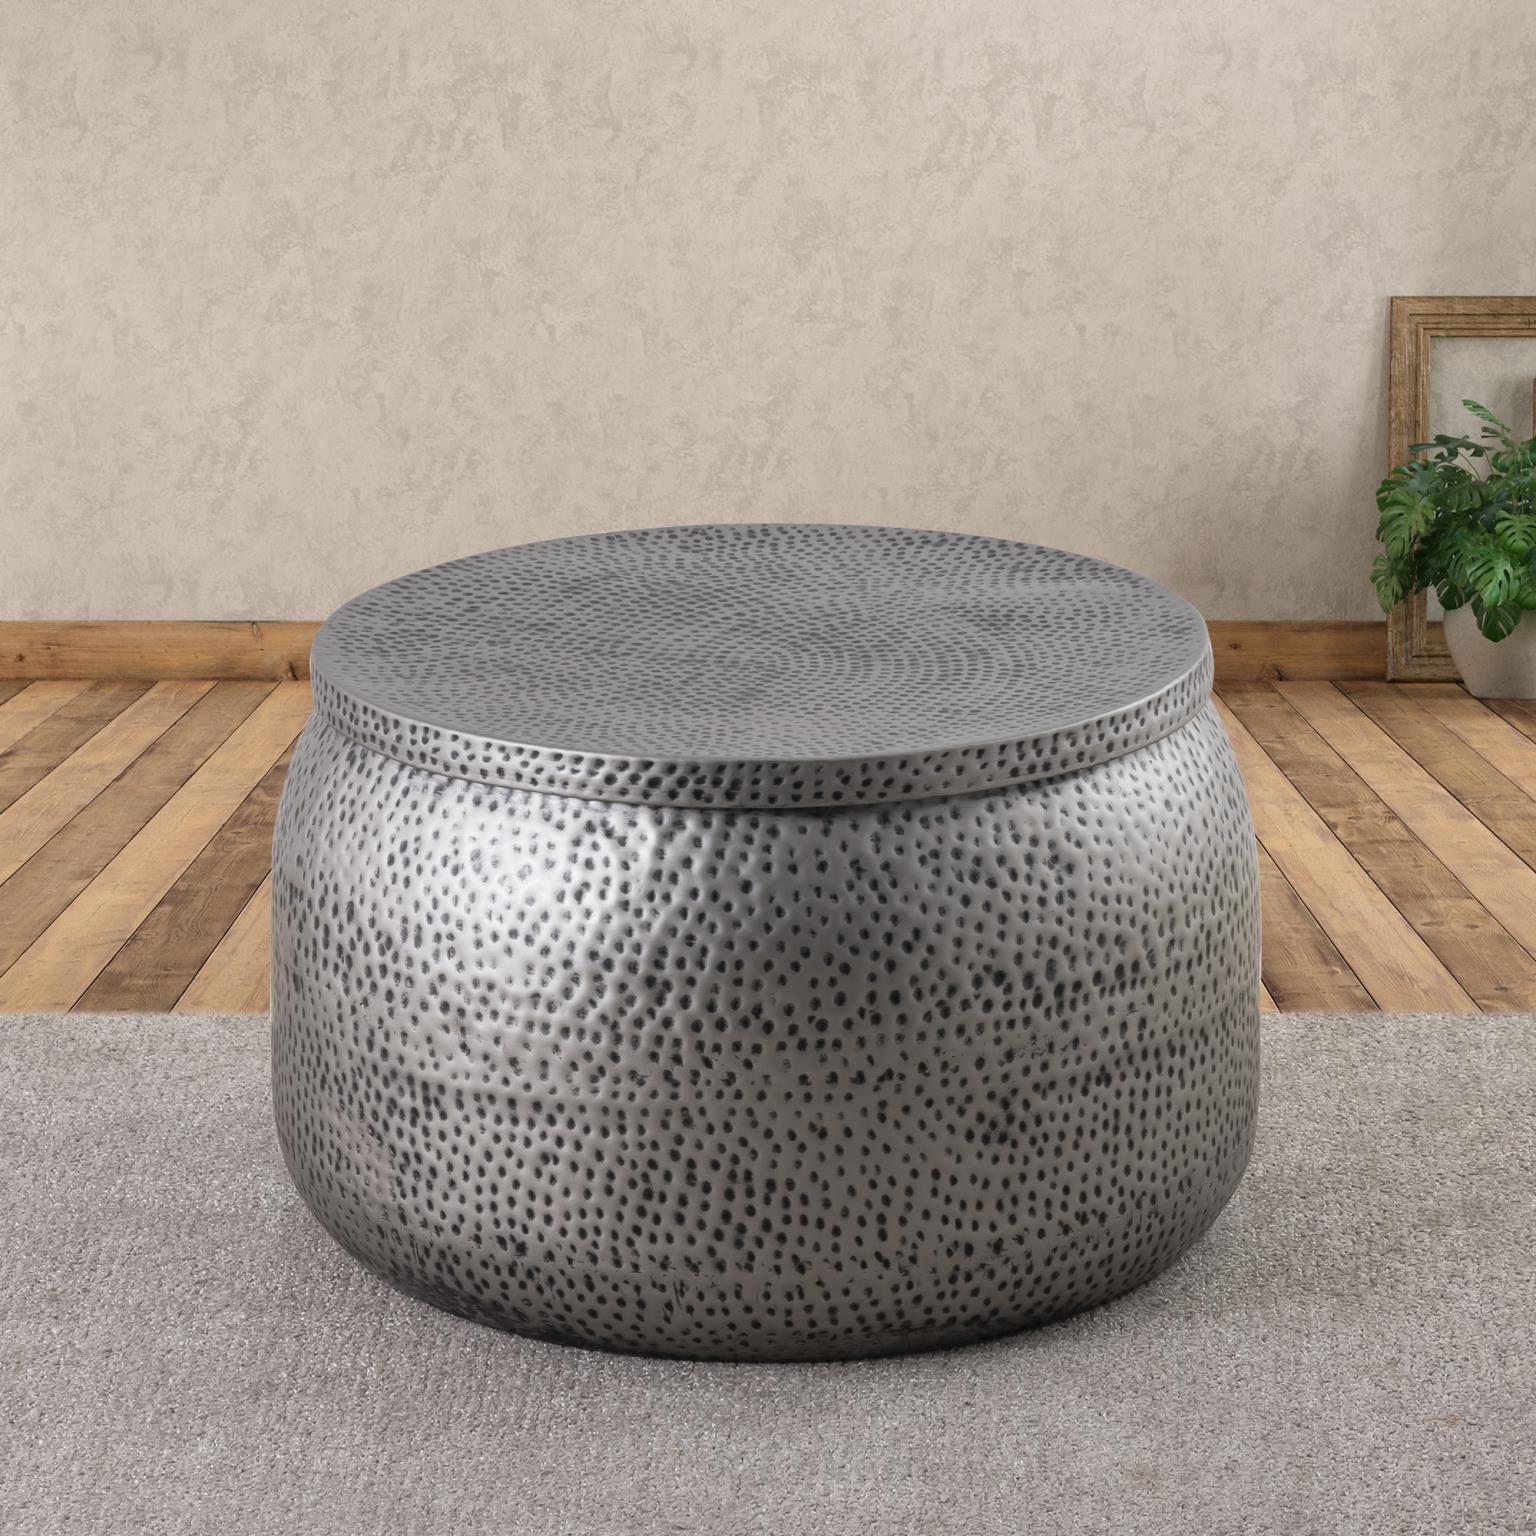 Contemporary, Modern Coffee Table T3368-26 Drum Coffee Table 718852652611 718852652611 in Gray 